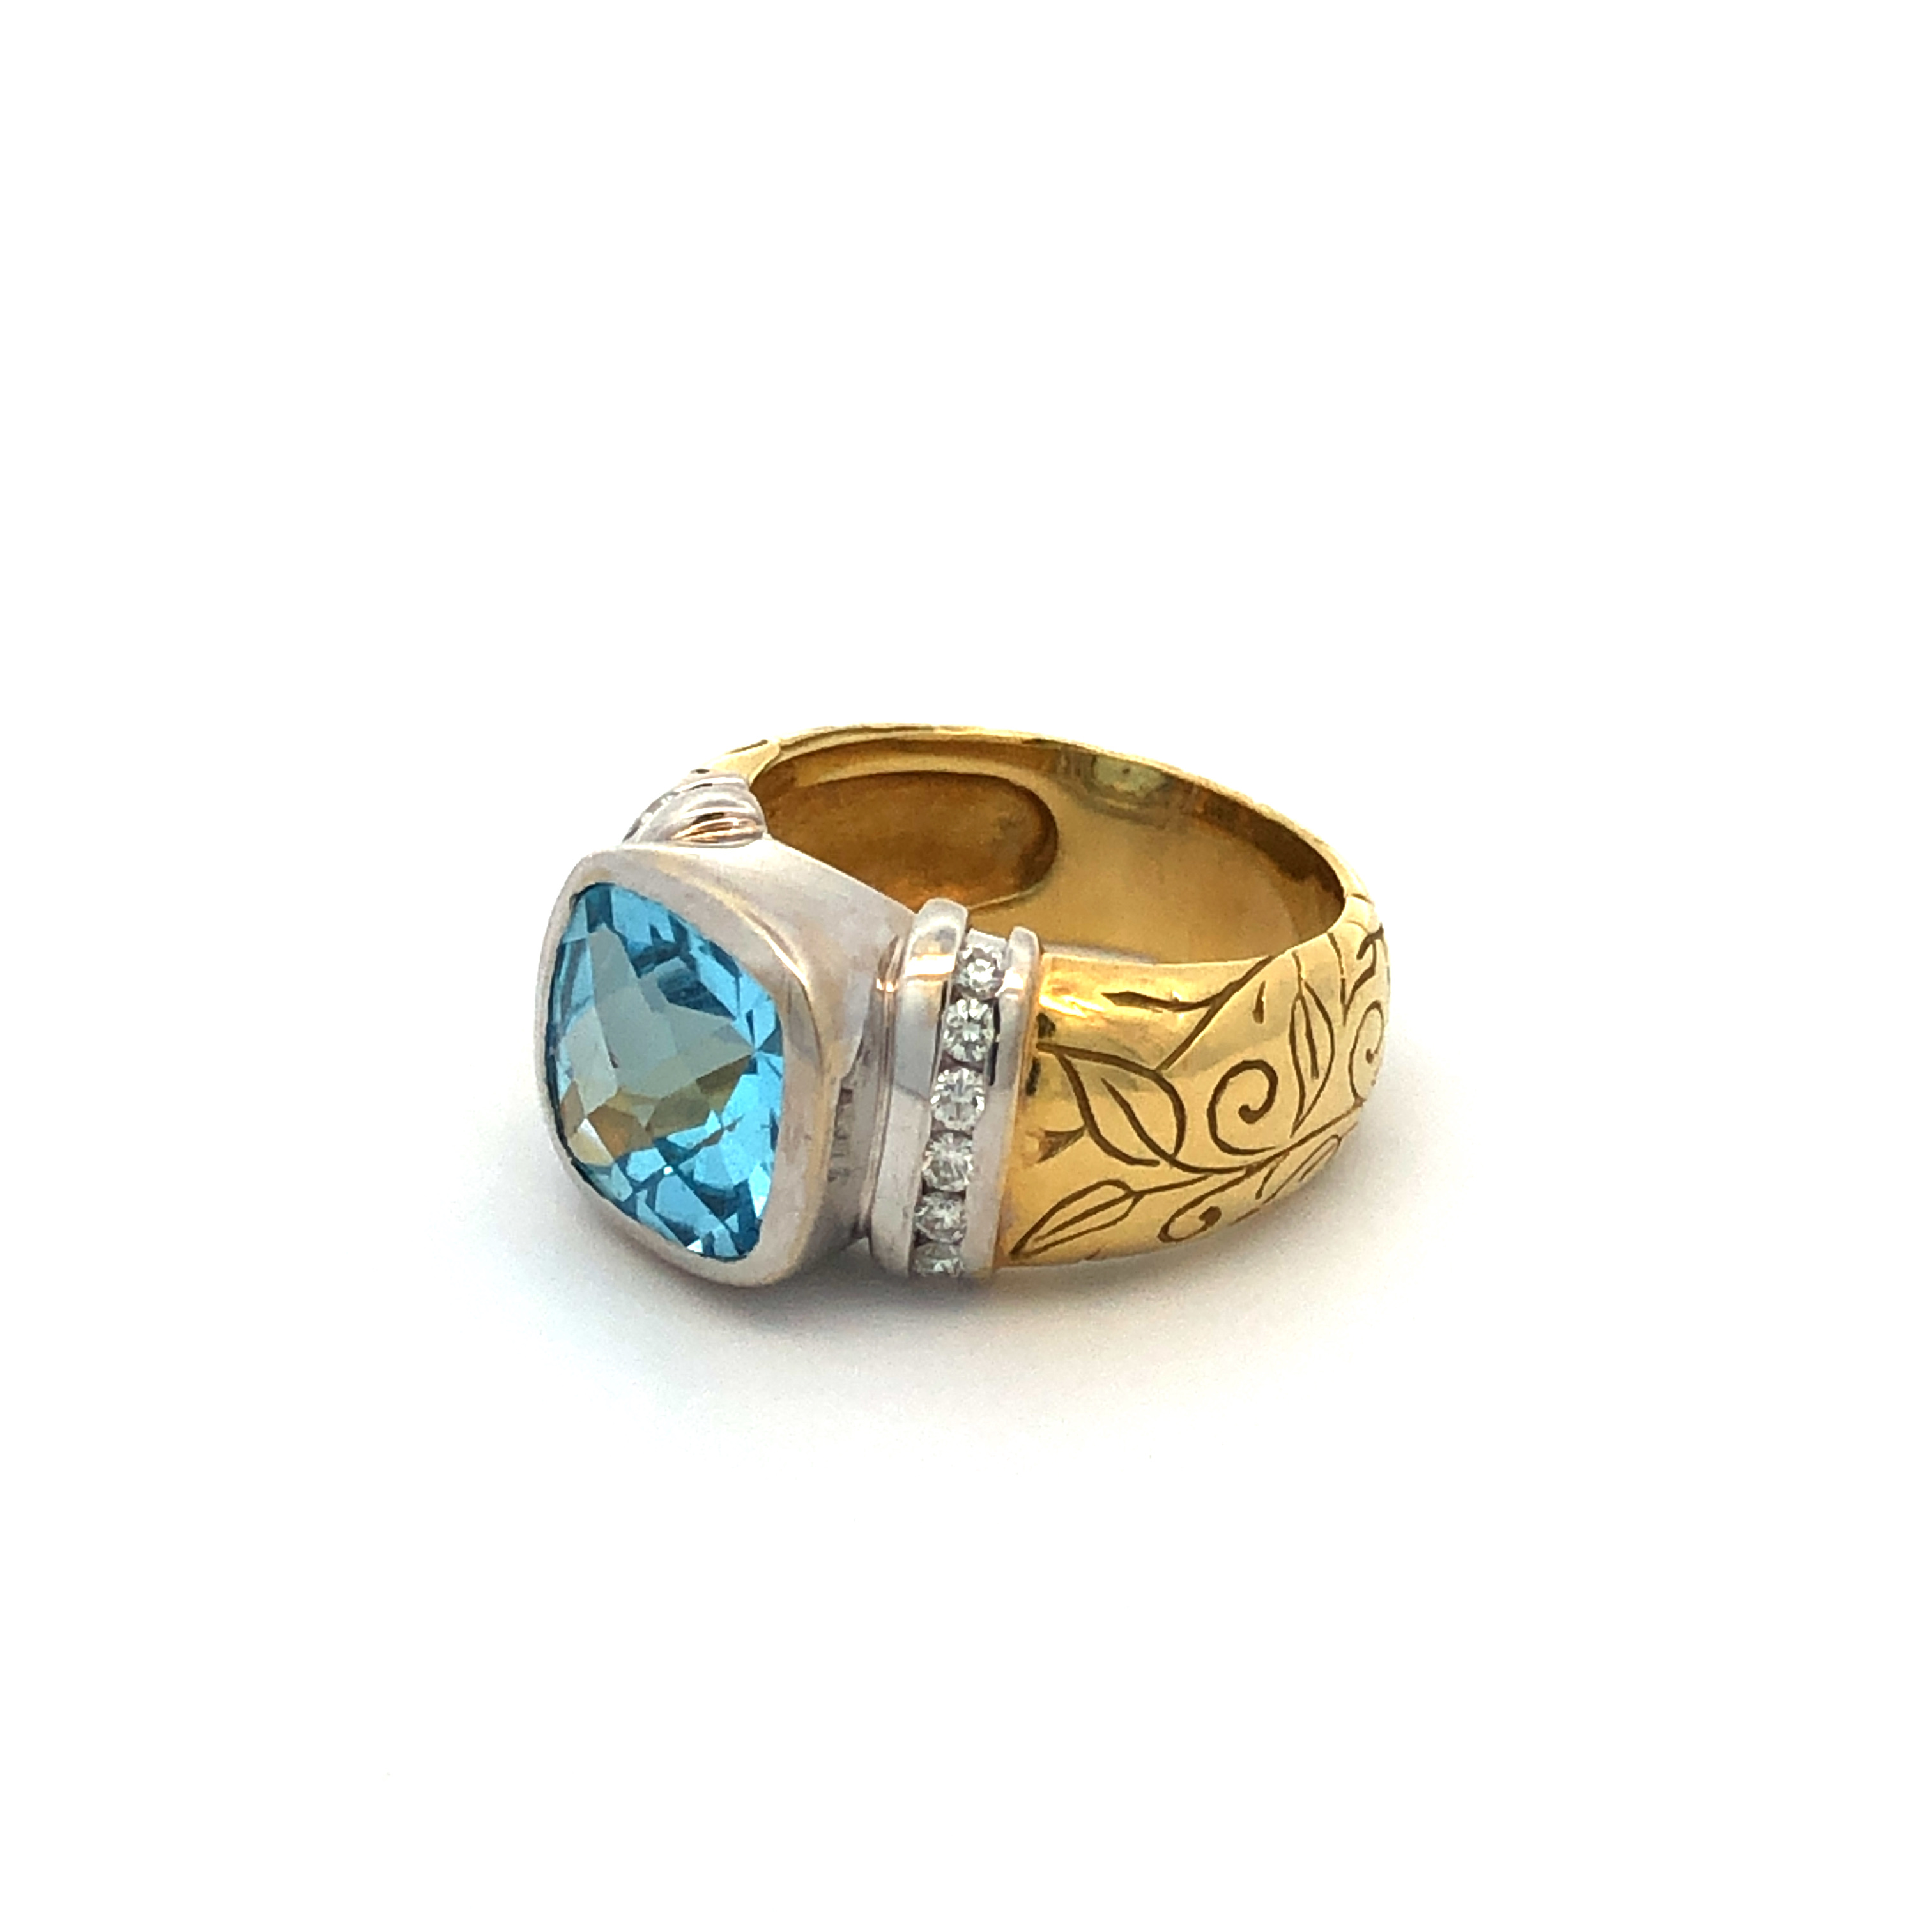 Estate 18K White and Gold Seidengang Ring with Blue Topaz